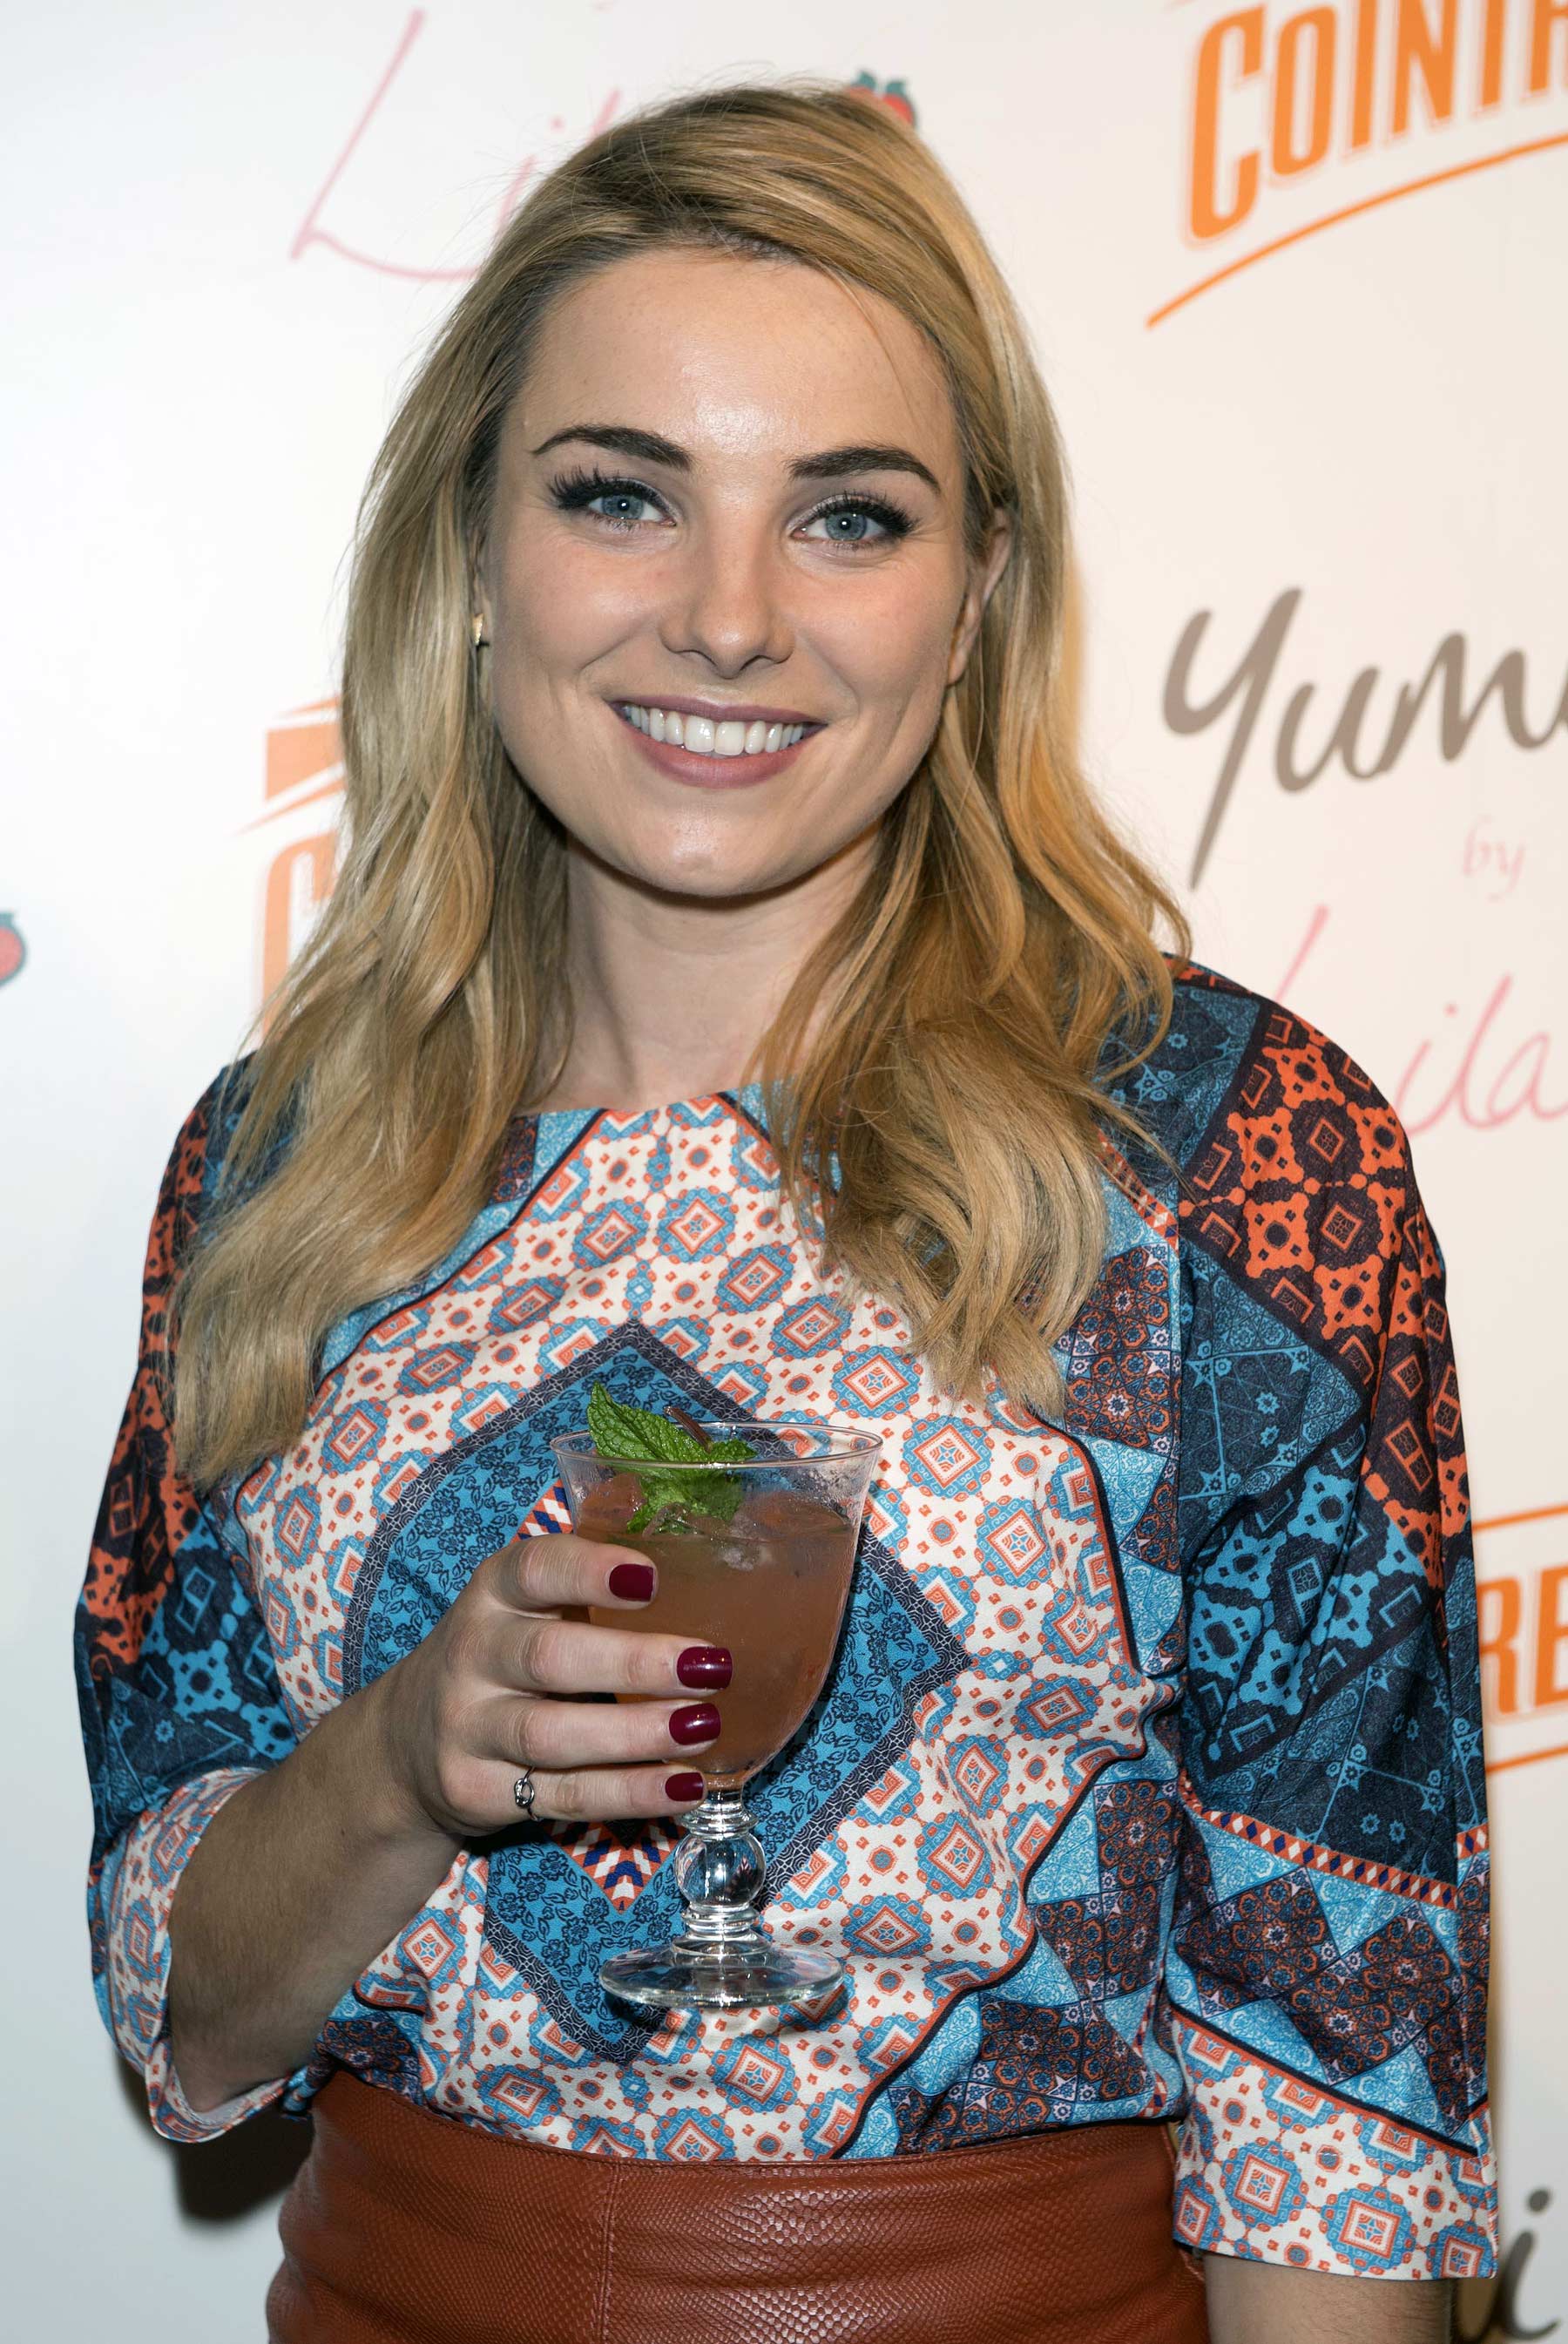 Sian Welby attends the Cointreau launch party for Yumi By Lilah SS 2016 collection